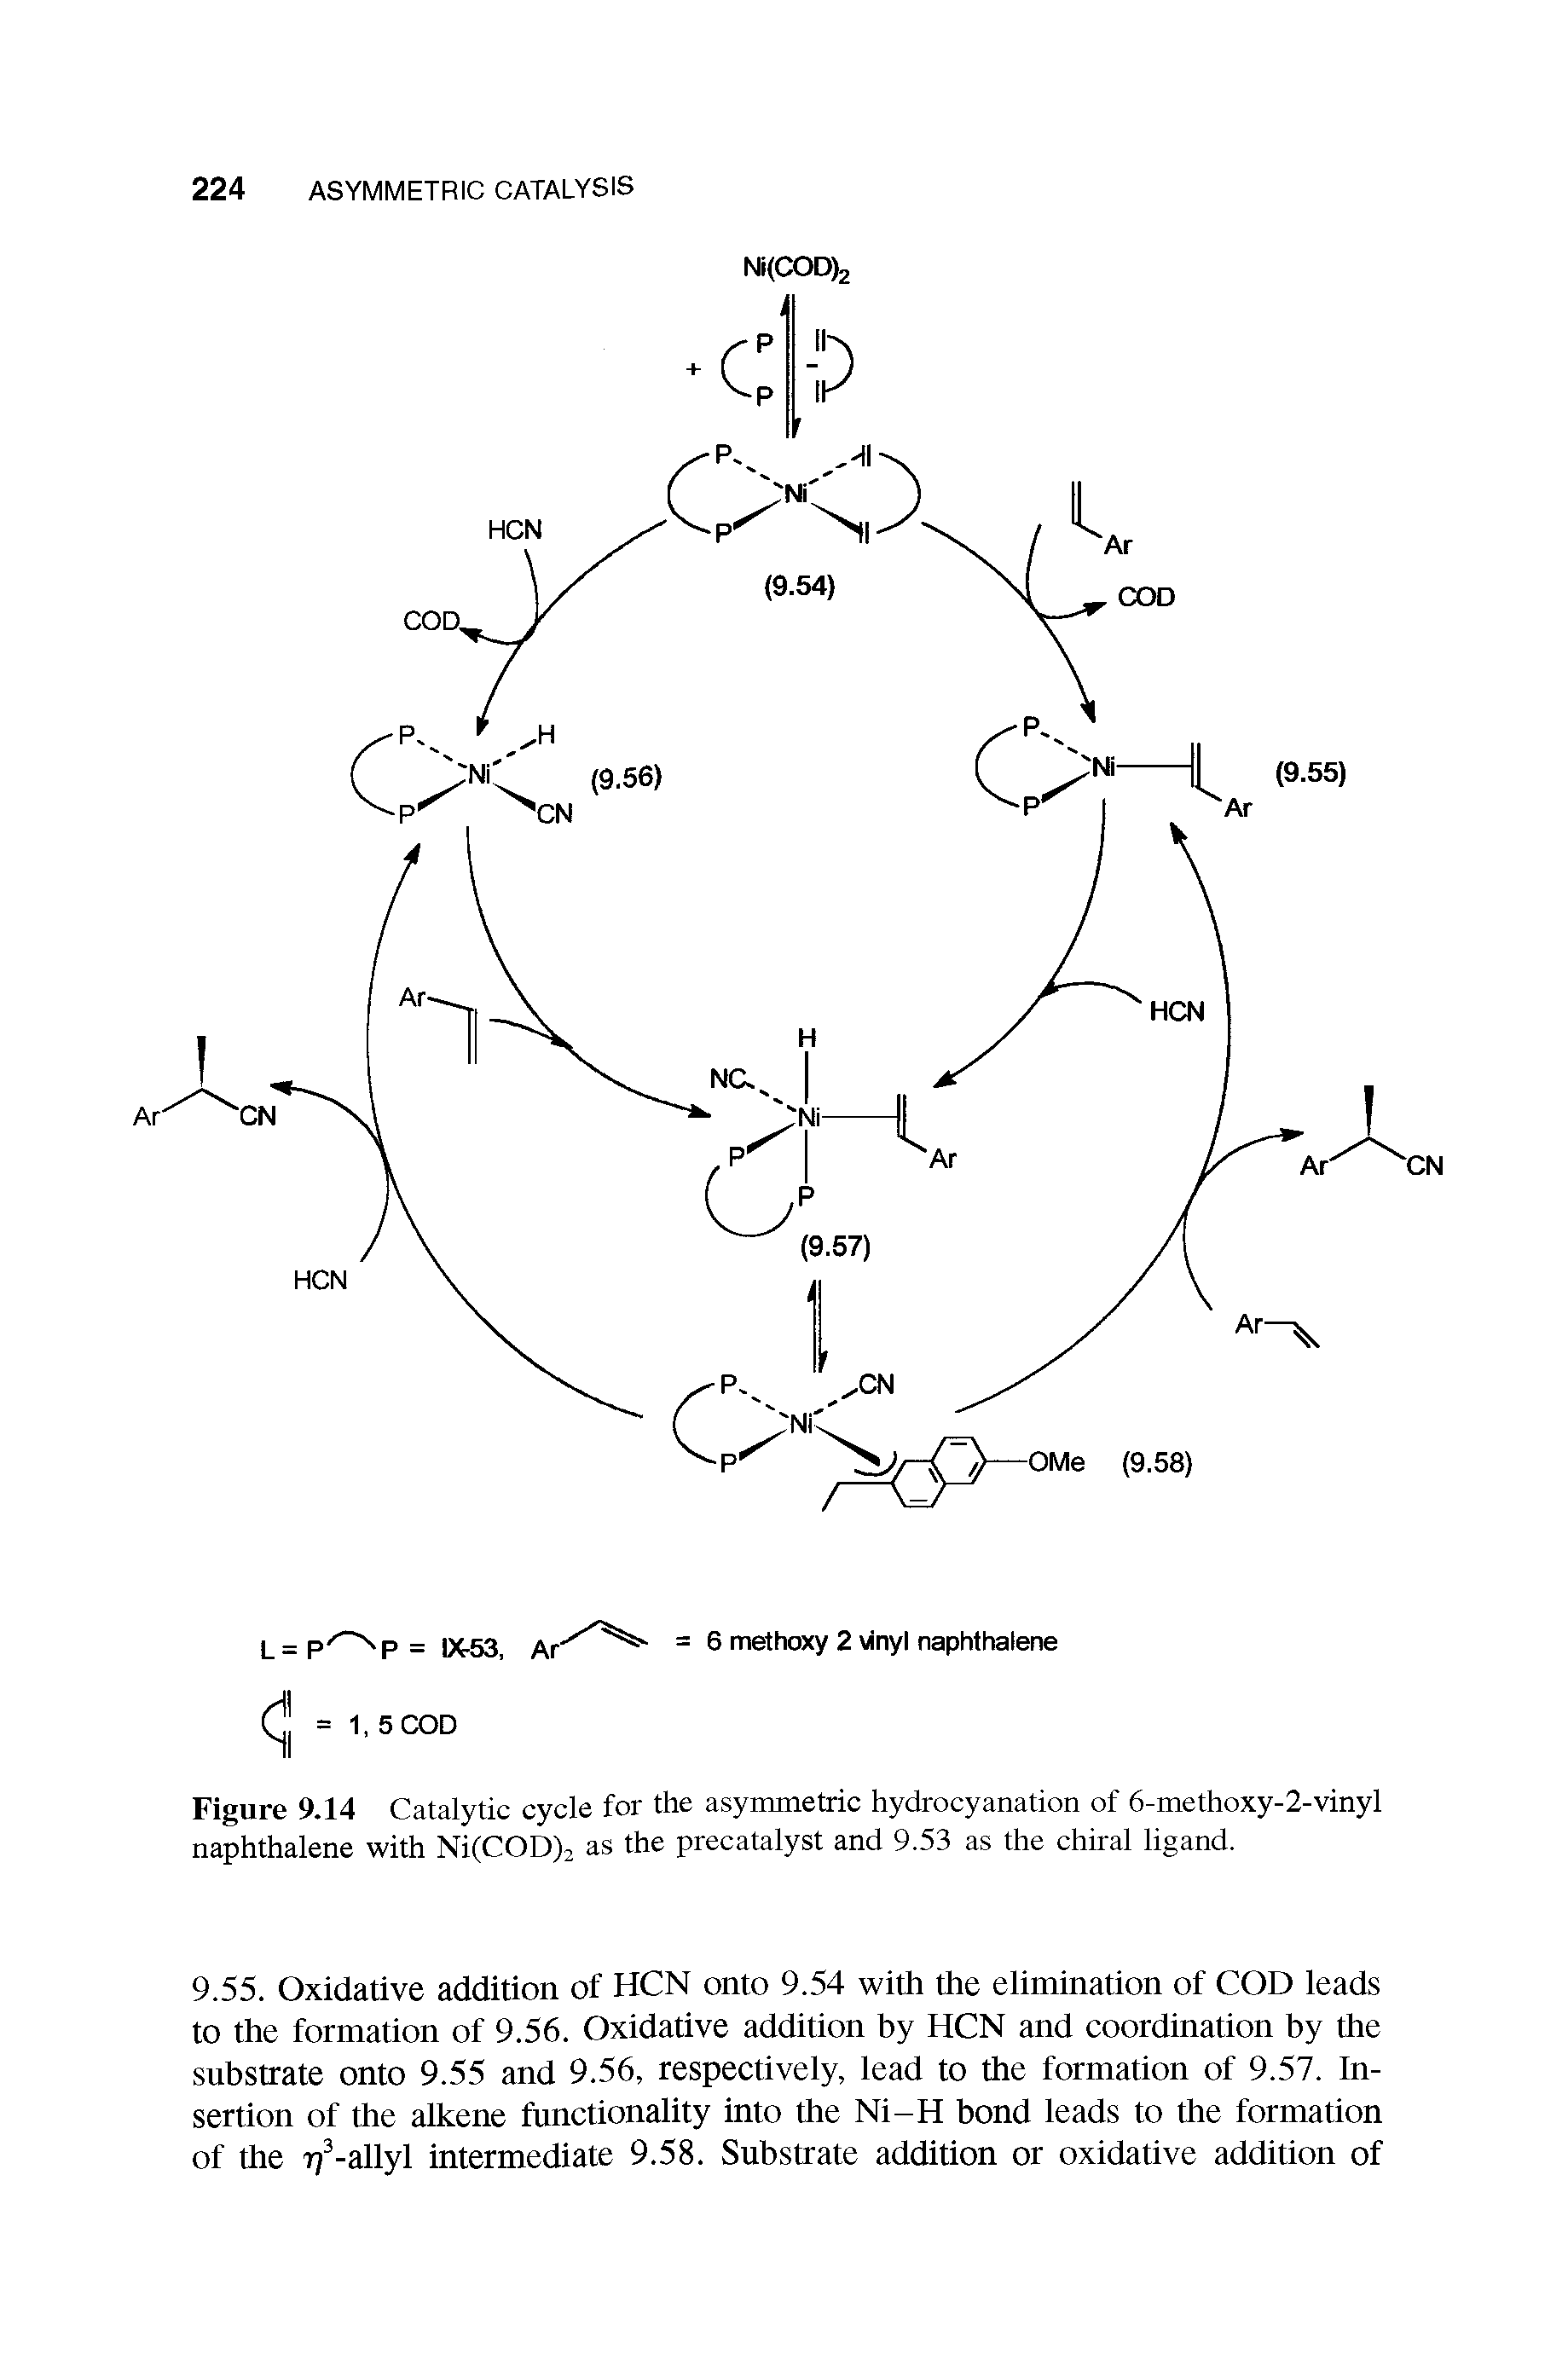 Figure 9.14 Catalytic cycle for the asymmetric hydrocyanation of 6-methoxy-2-vinyl naphthalene with Ni(COD)2 as the precatalyst and 9.53 as the chiral ligand.